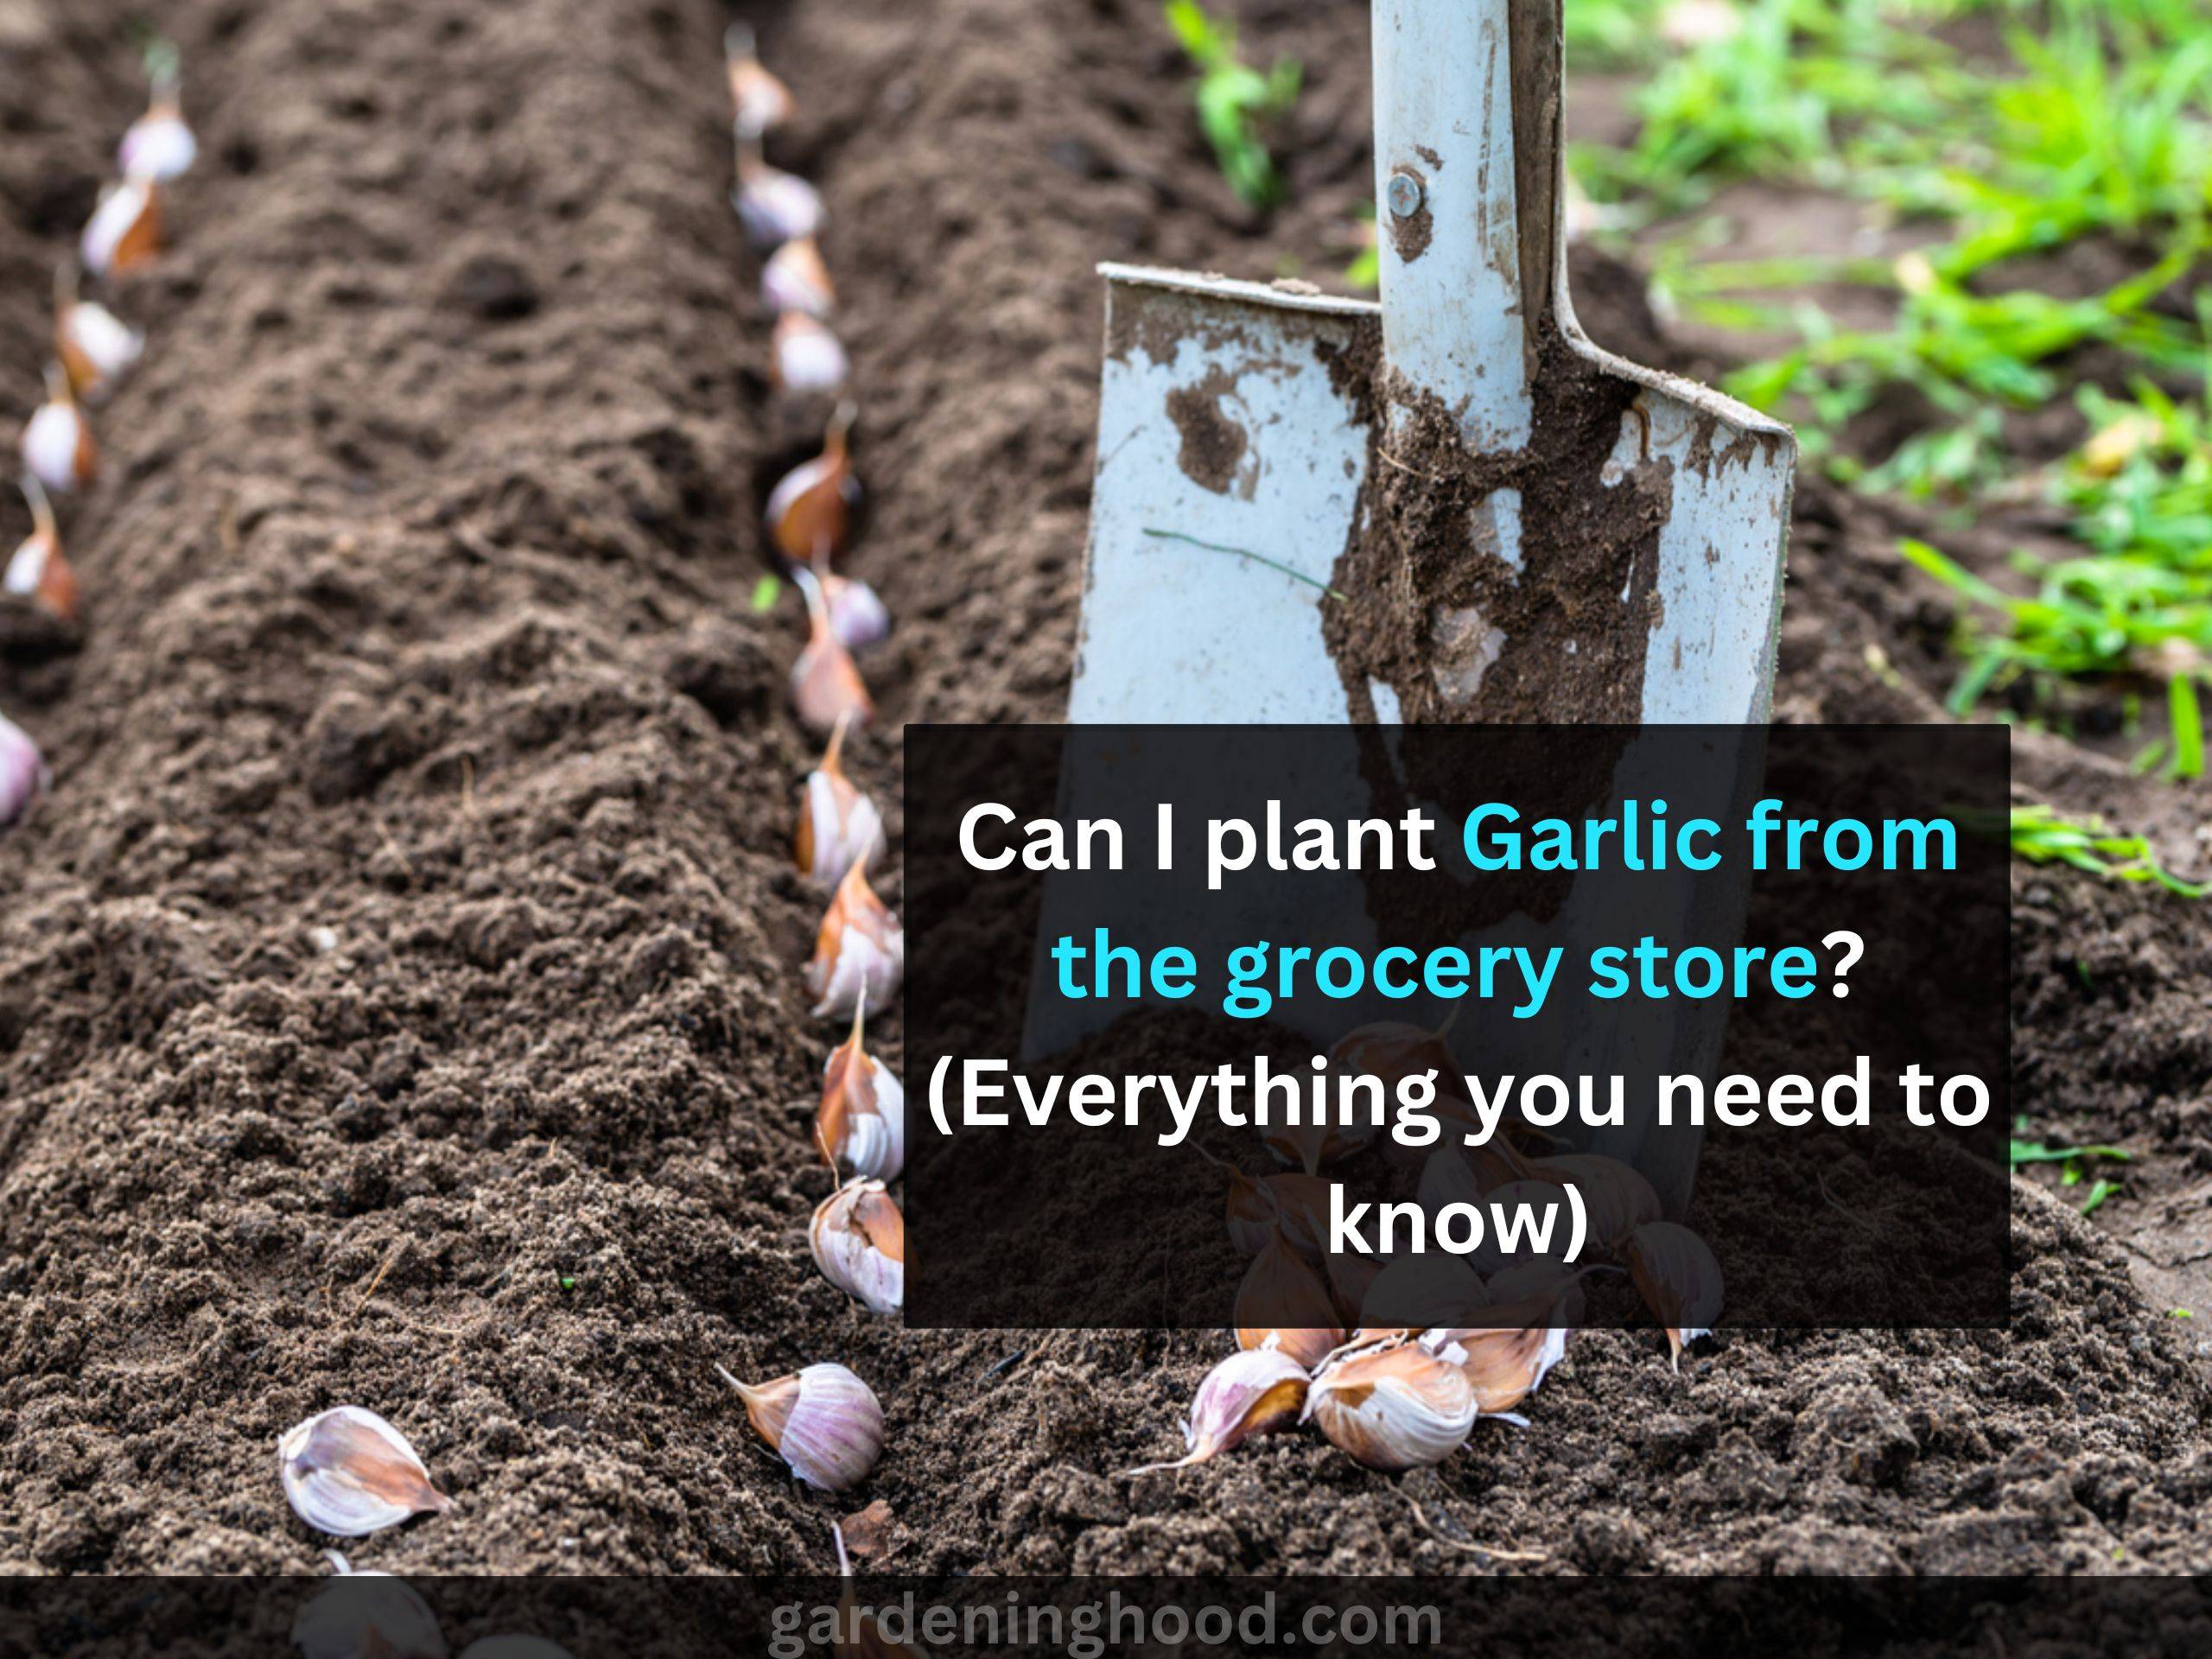 Can I plant Garlic from the grocery store? (Everything you need to know)